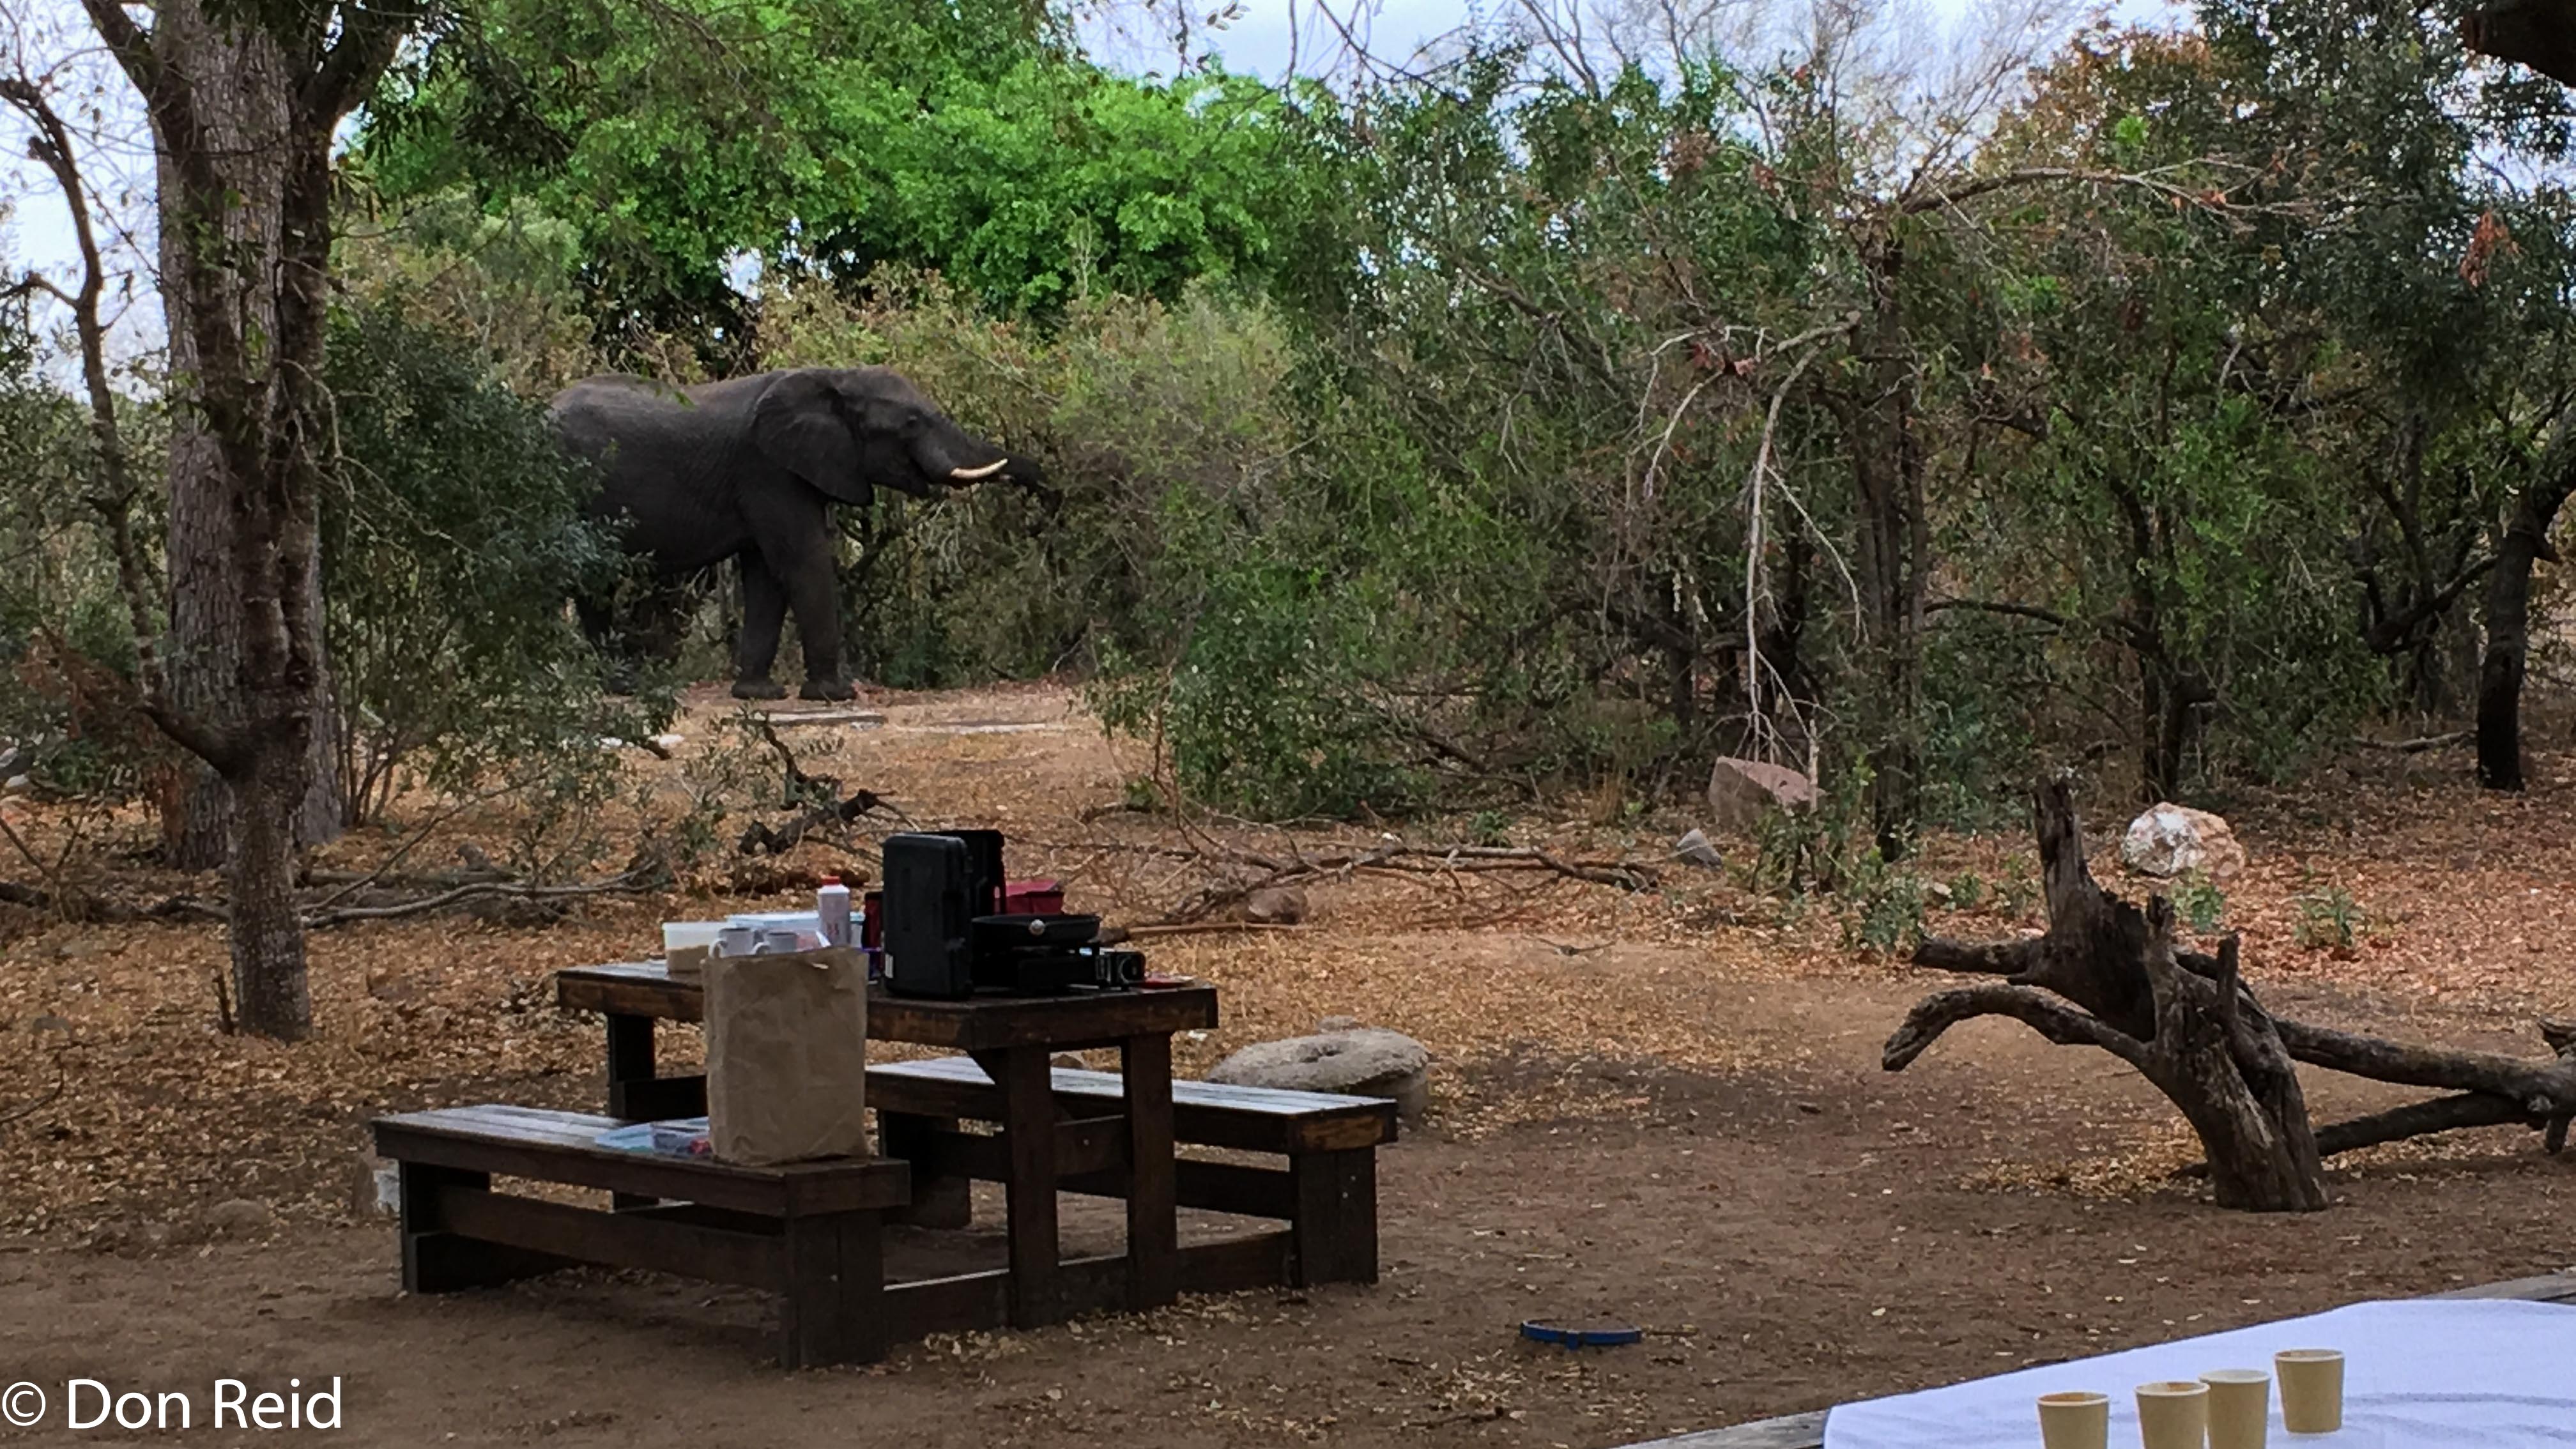 Afsaal picnic spot - Elephant nearby, KNP